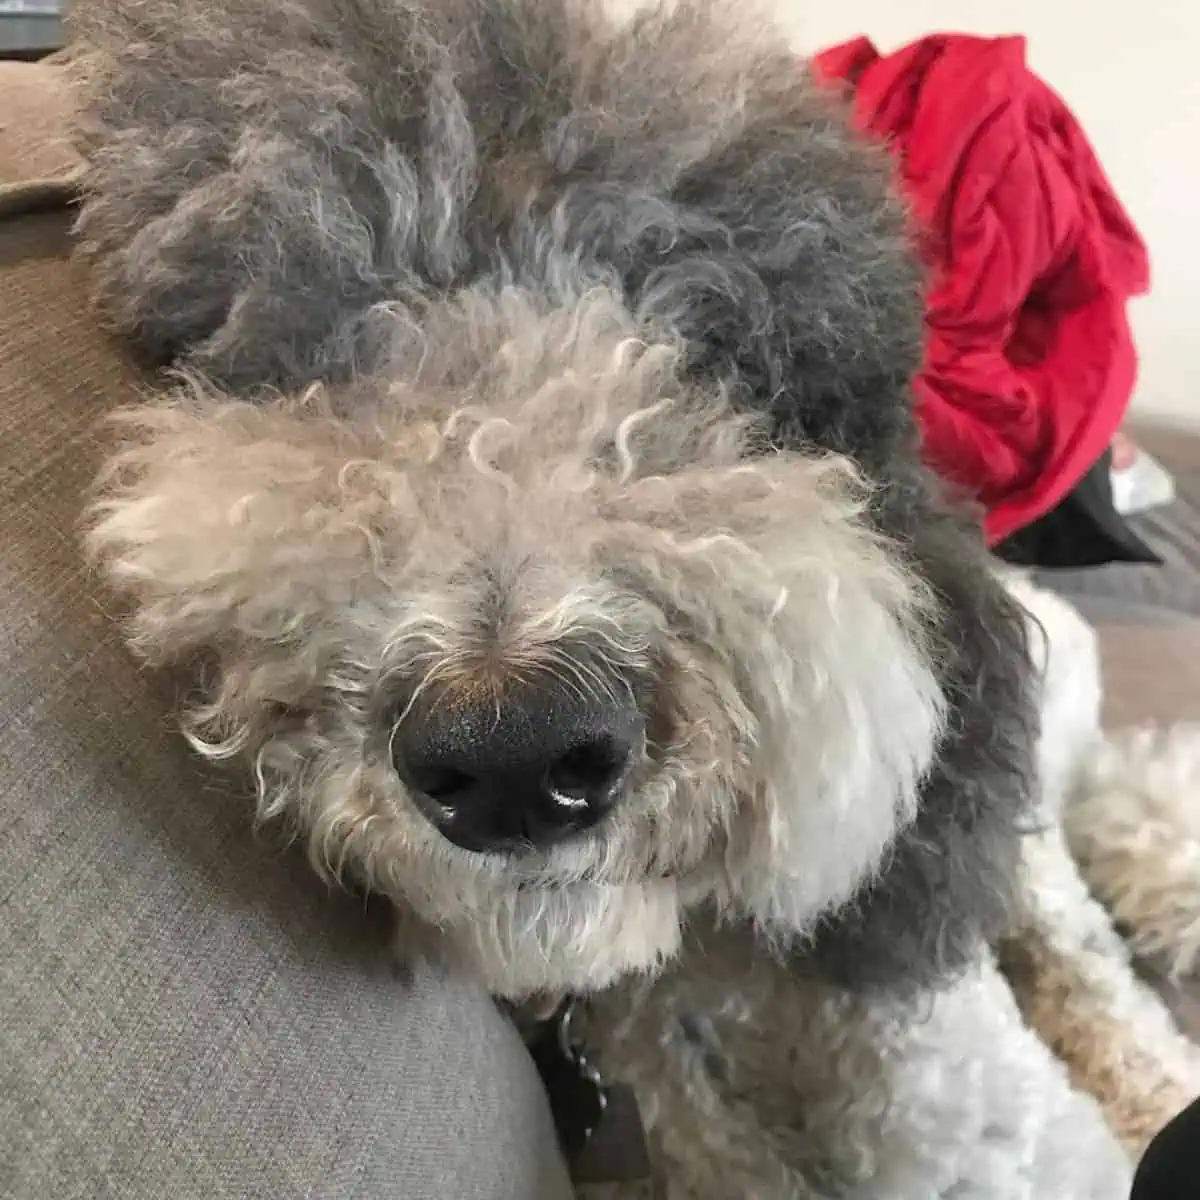 Poodle at the couch relaxing